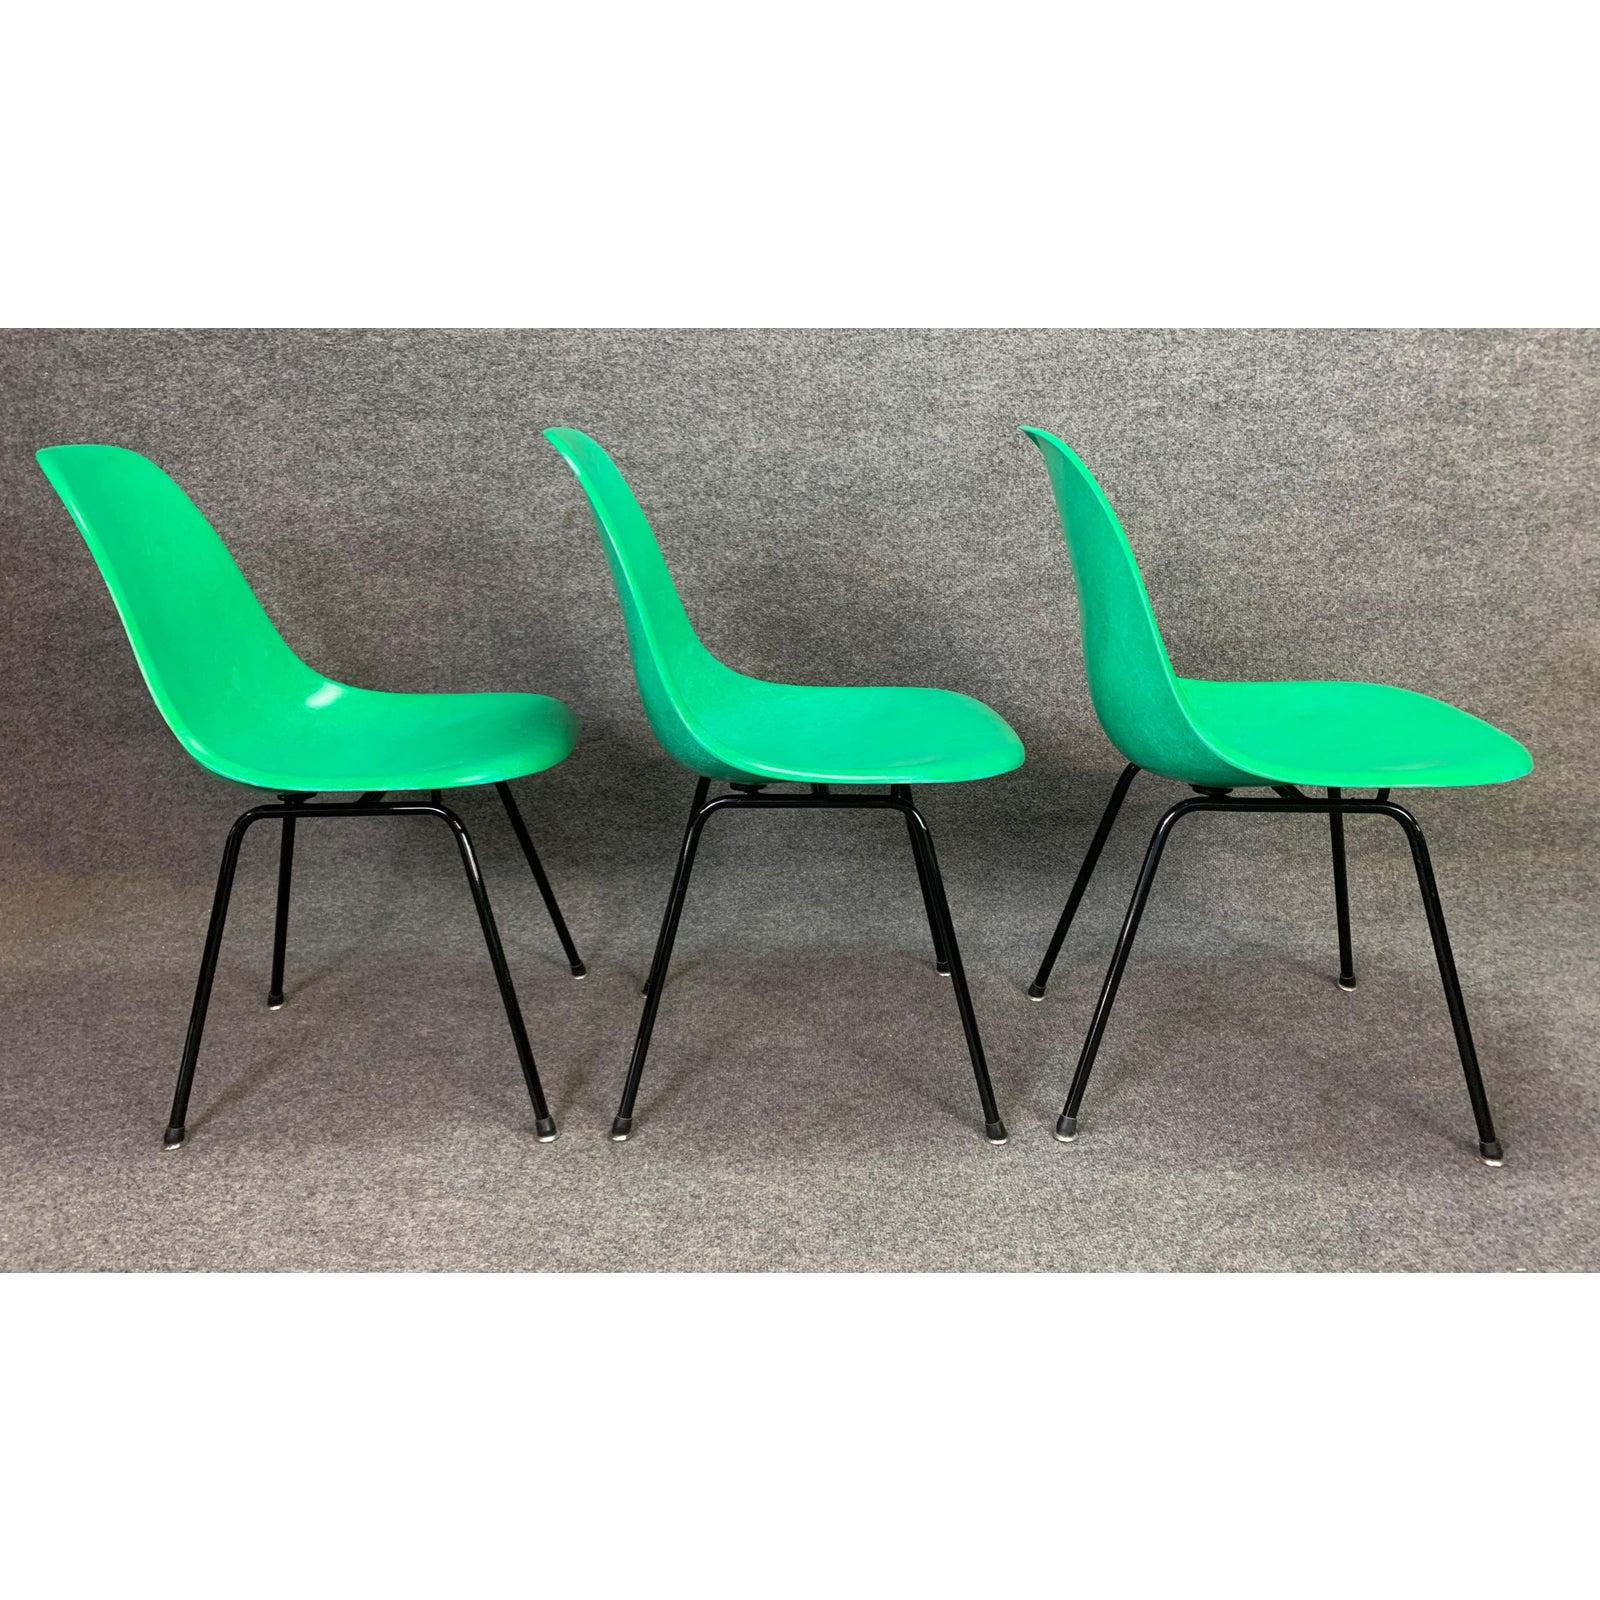 Set of 6 Midcentury DSX Fiberglass Chairs by Charles Eames for Herman Miller 3